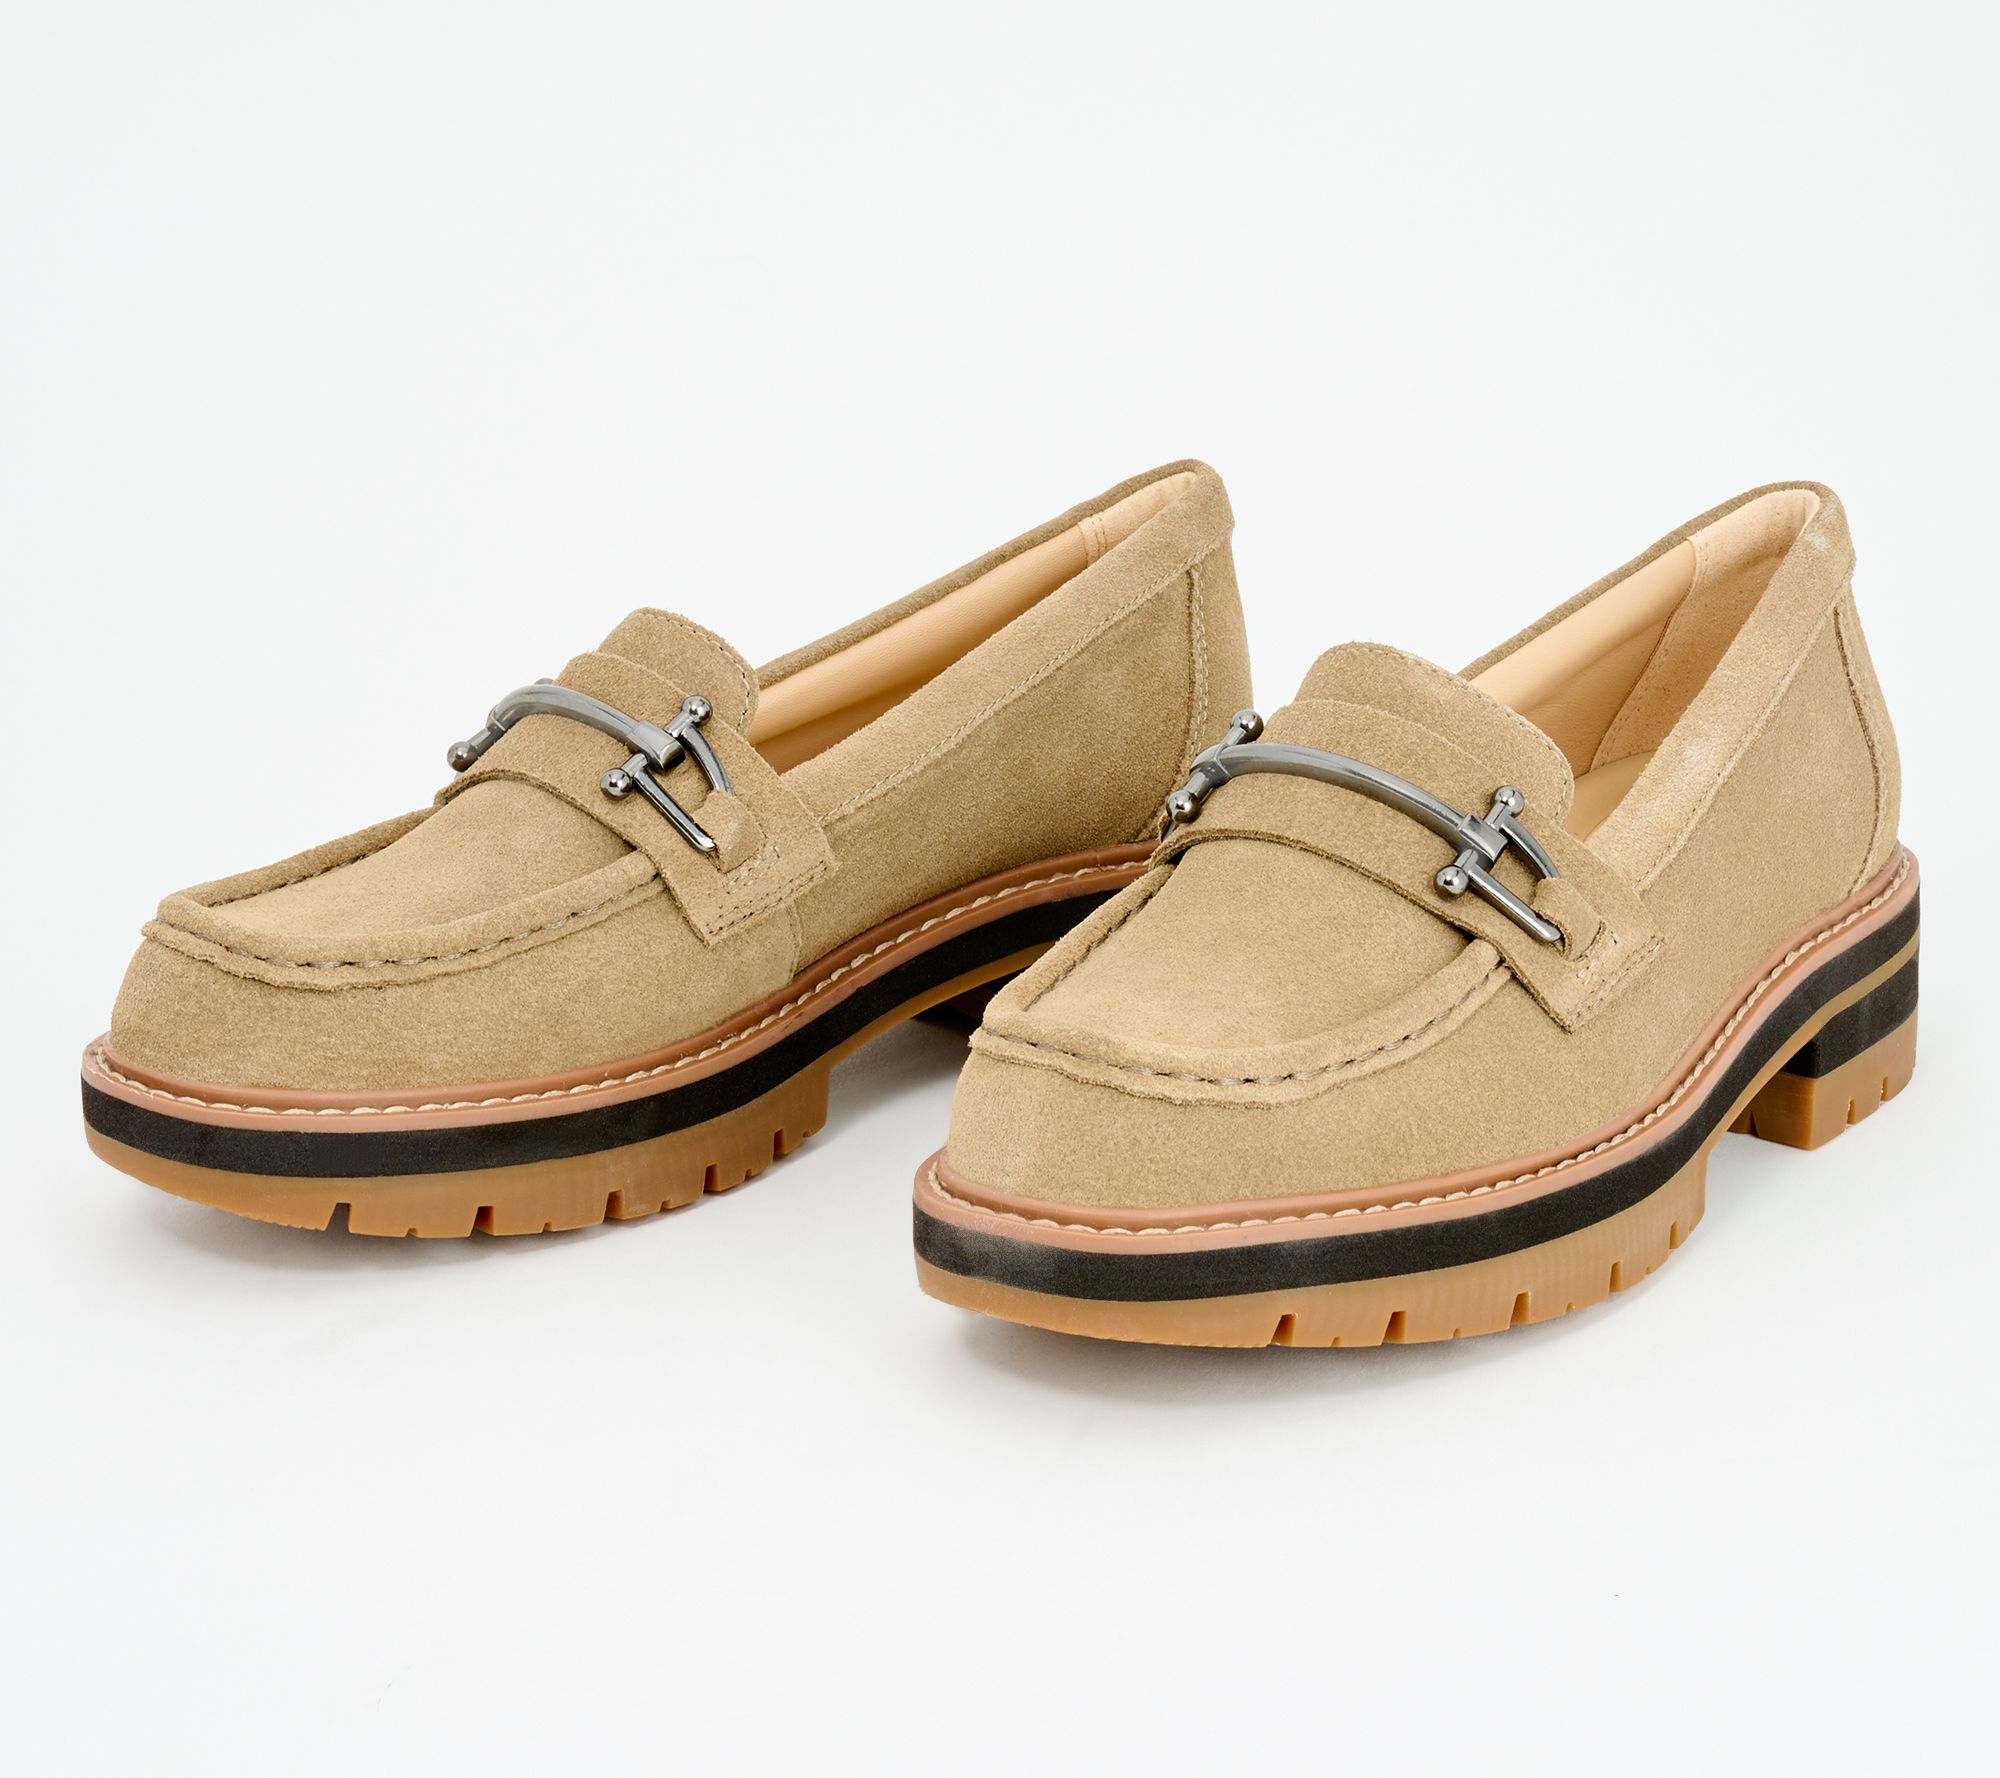 Clarks Shoes - Never step out of style with our men's